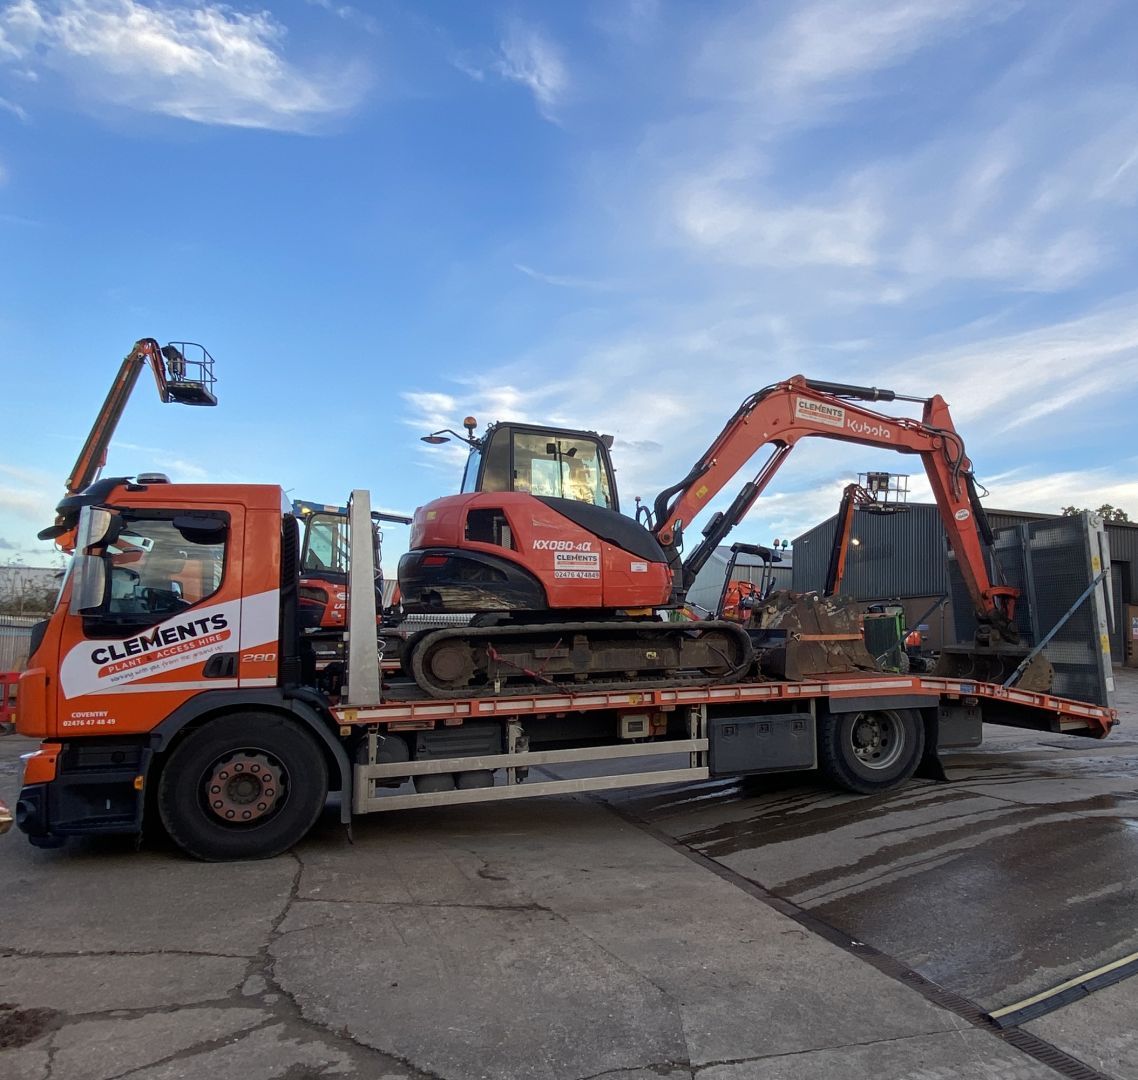 Busy day ahead, starting with dropping this 8ton Kubota Excavator to site for one of our customers. Great service with a smile from our brilliant team of Drivers. 💪 👍 🌐 buff.ly/2rj23D5 ☎️ 02476 474849